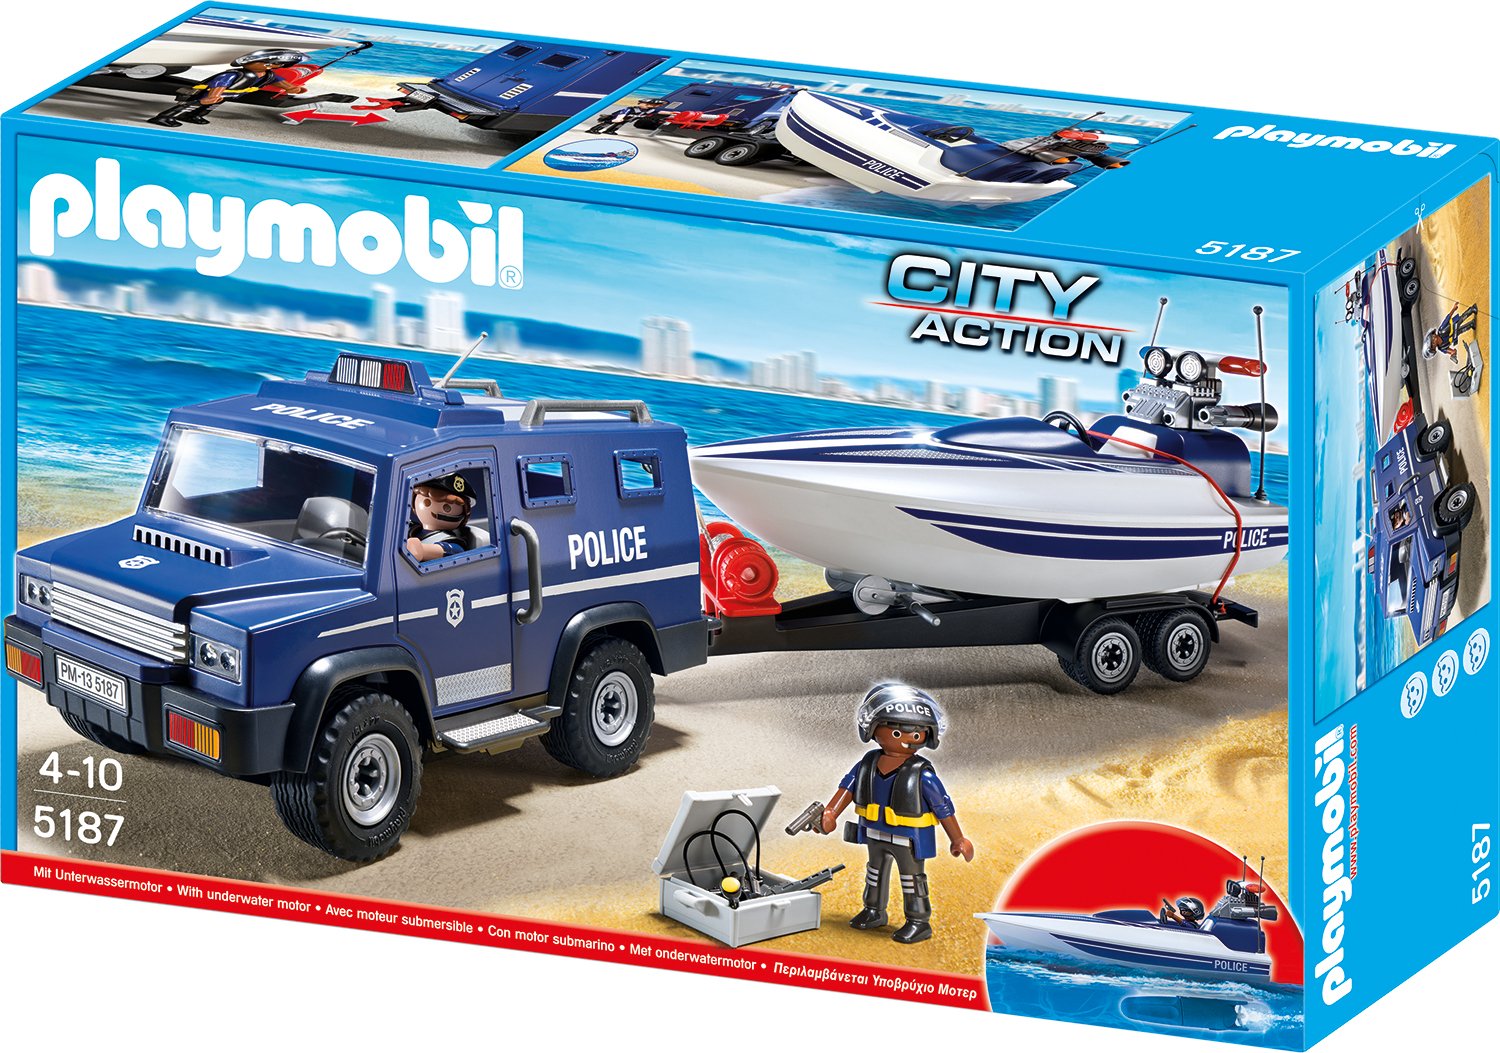 Playmobil Police Truck With Speedboat